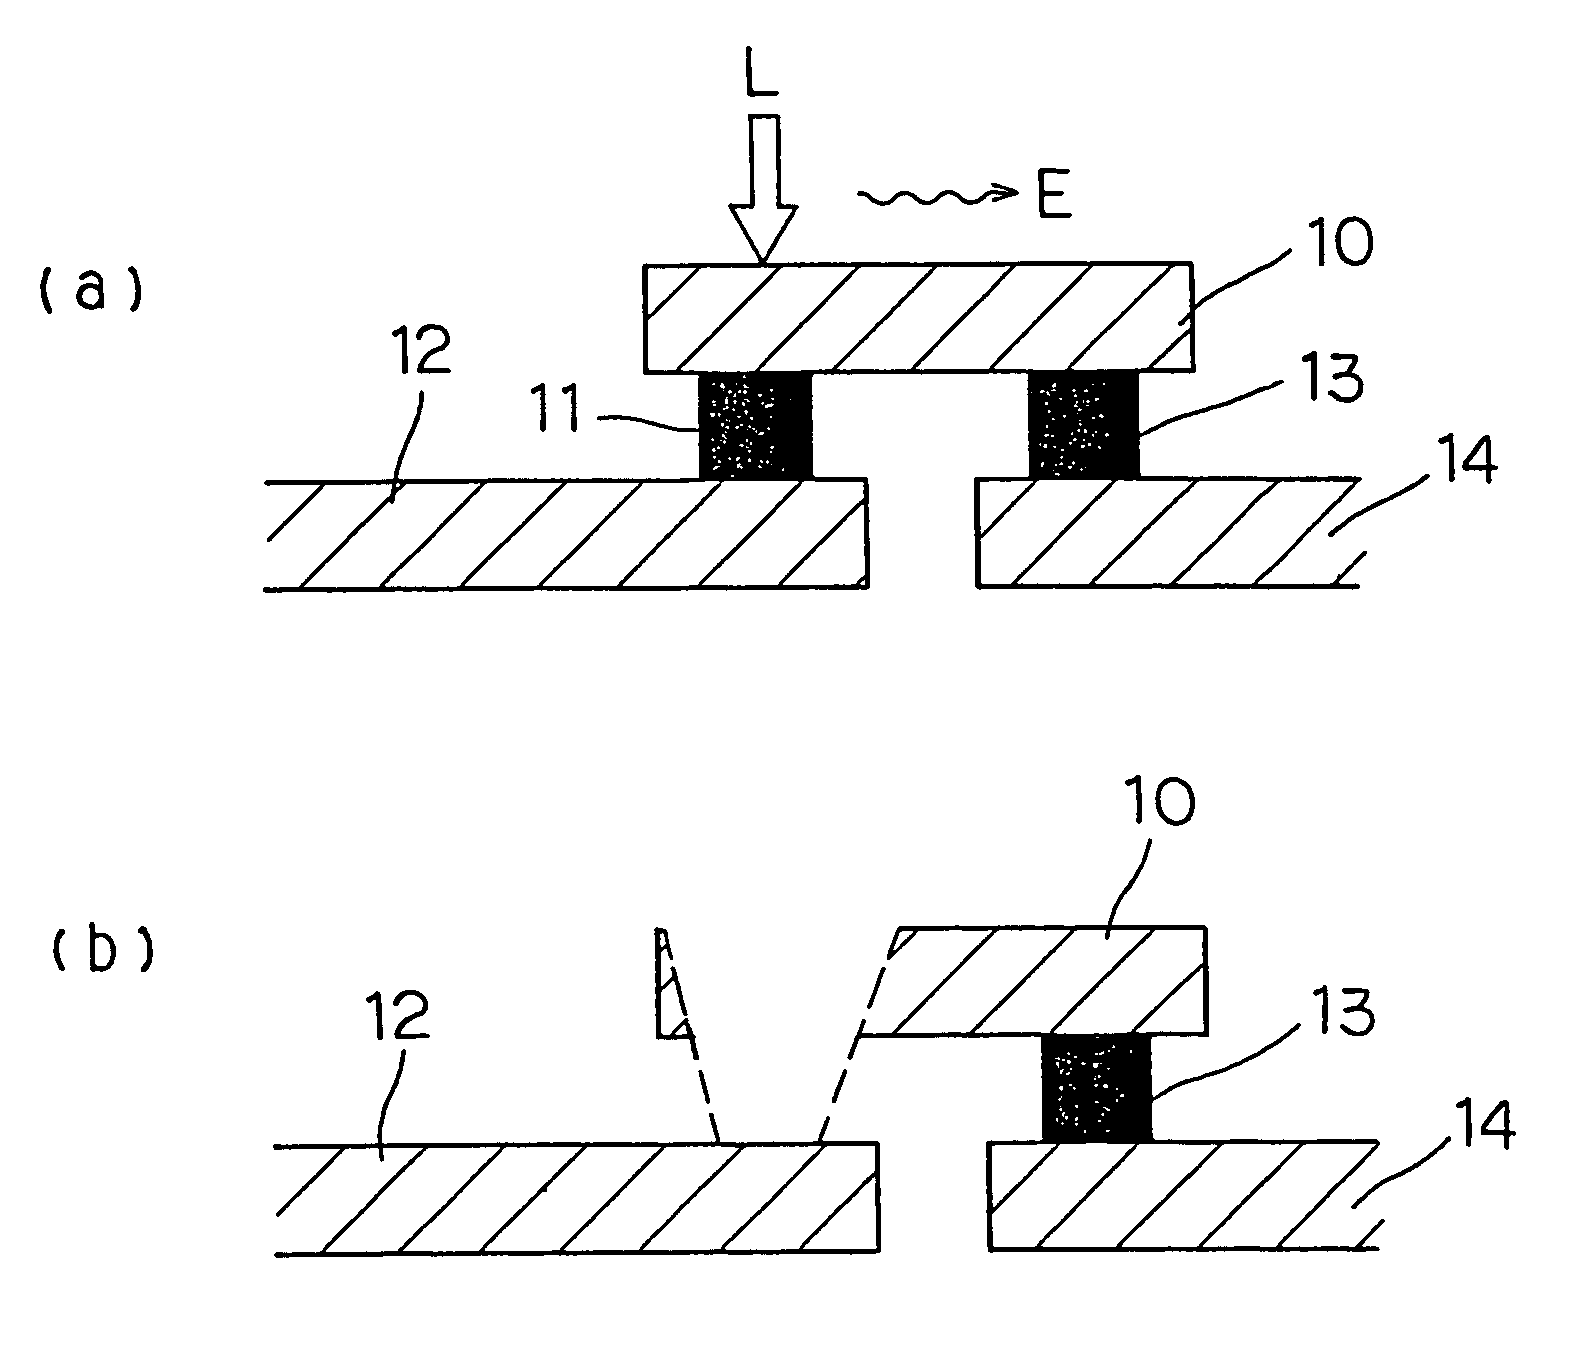 Semiconductor device having a fuse and a low heat conductive section for blowout of fuse